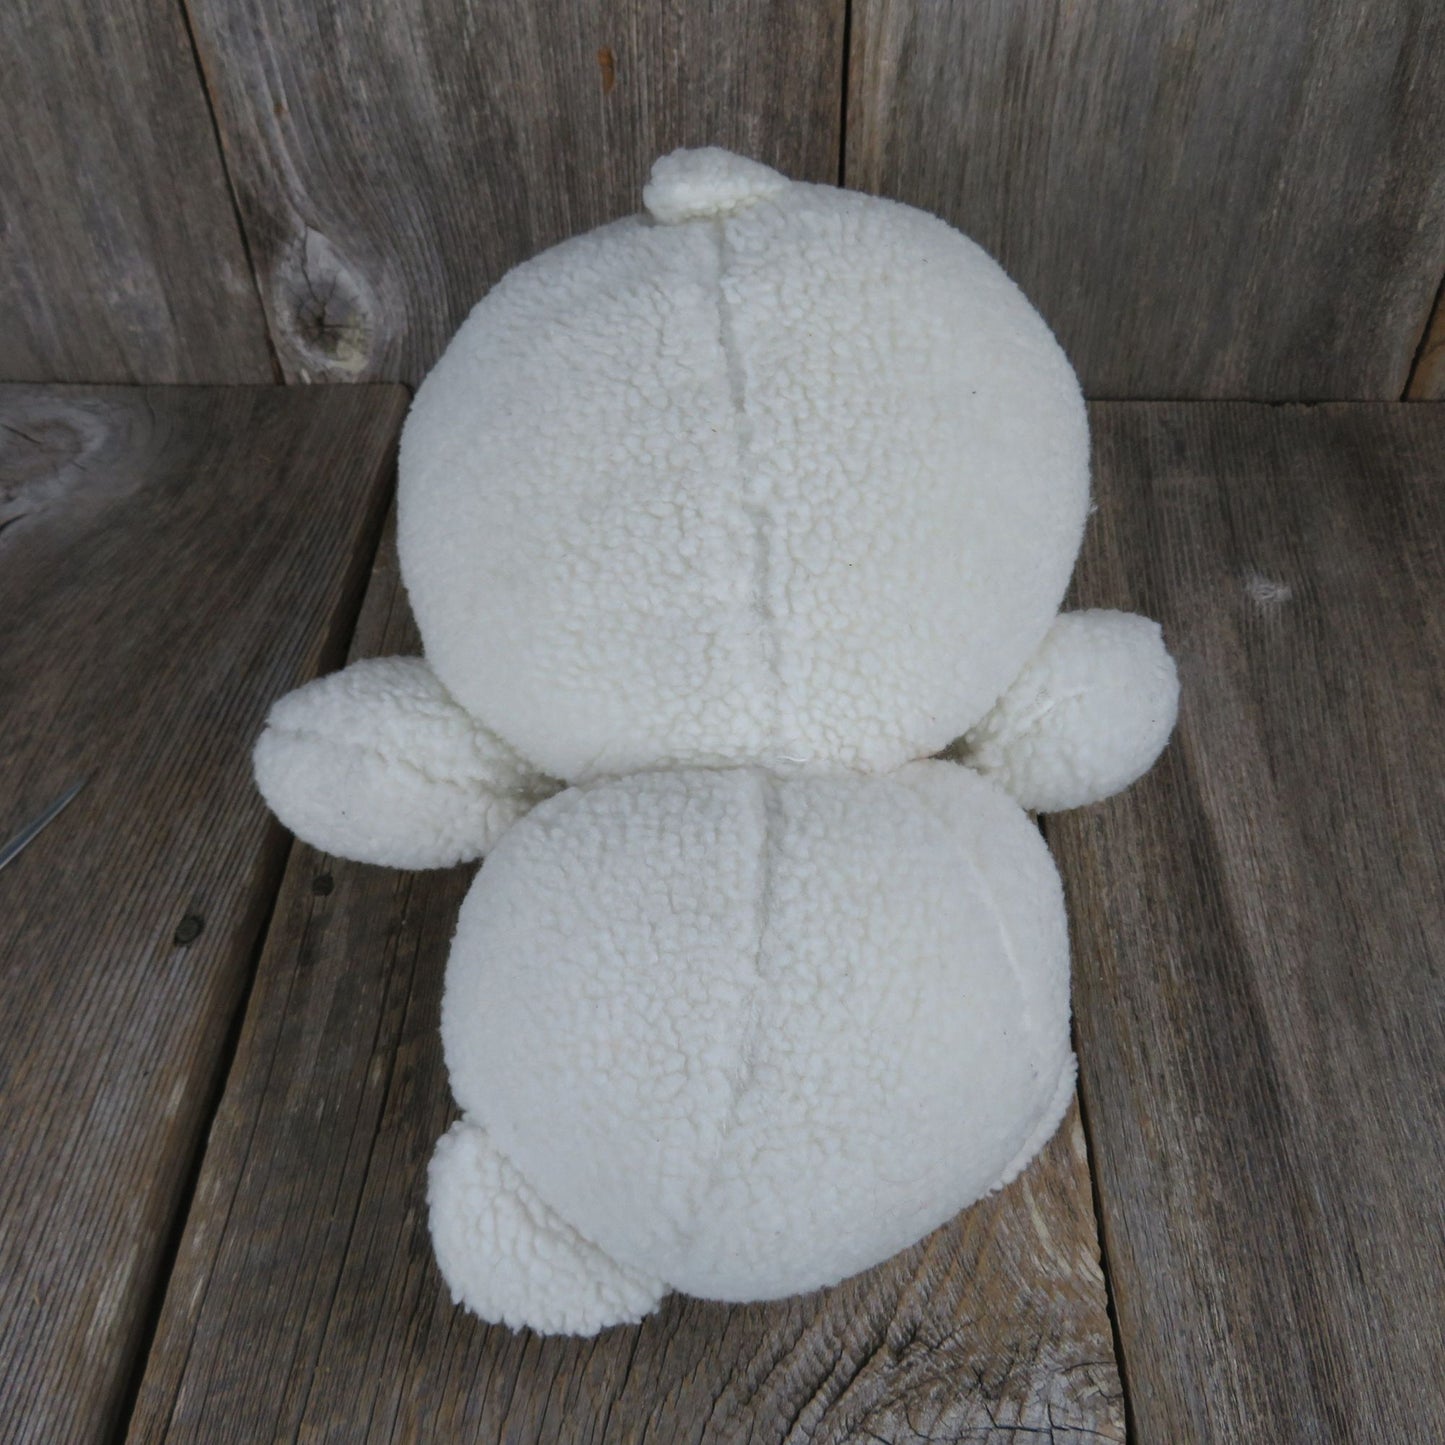 Teddy Bear Plush White Sherpa Fleece Stitched Nose Curly Over Stuffed Vintage Animal